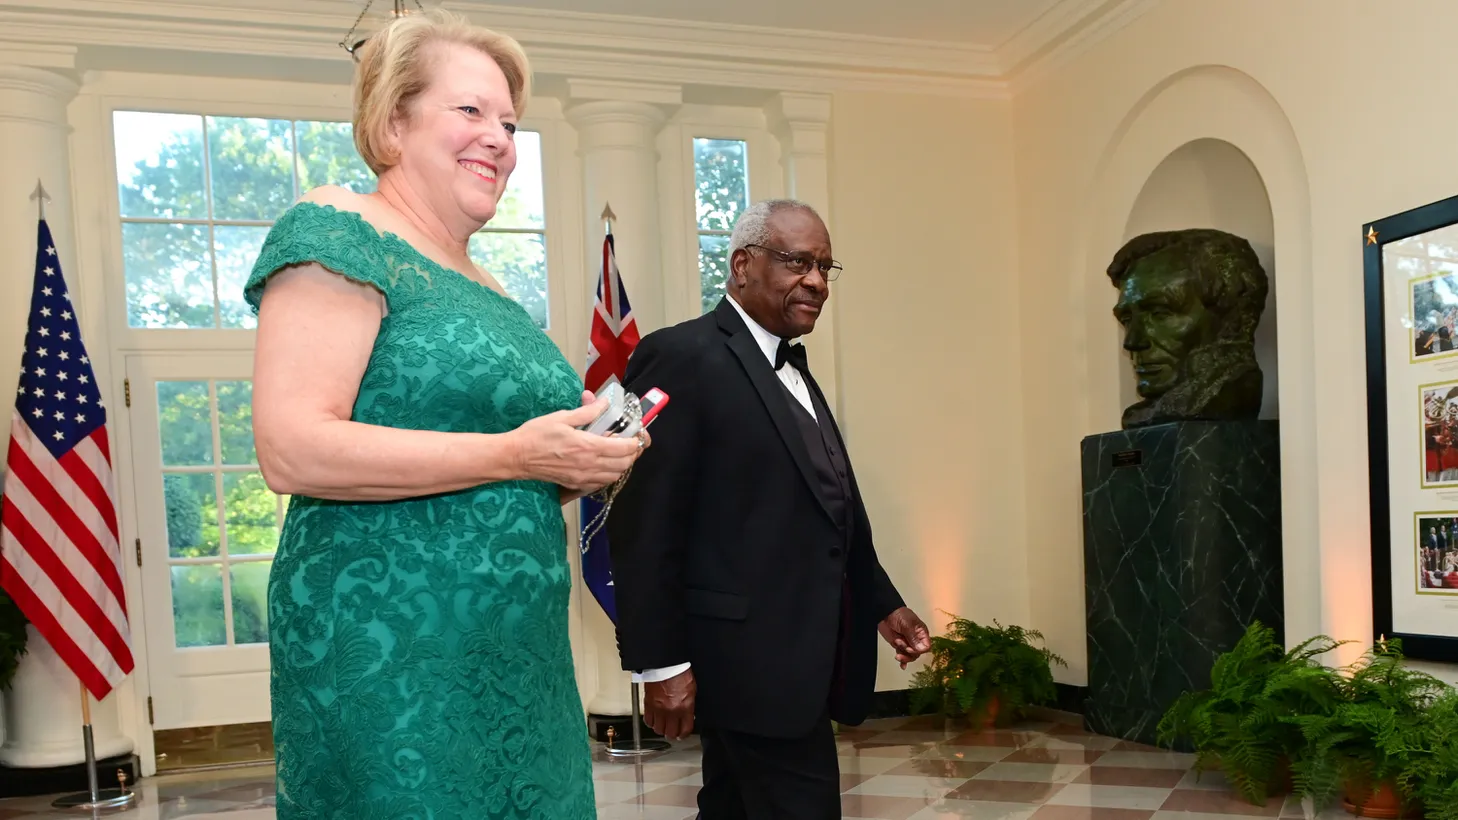 U.S. Supreme Court Justice Clarence Thomas arrives with his wife, Ginni Thomas, for a state dinner for Australia’s Prime Minister Scott Morrison at the White House in Washington, U.S. September 20, 2019.